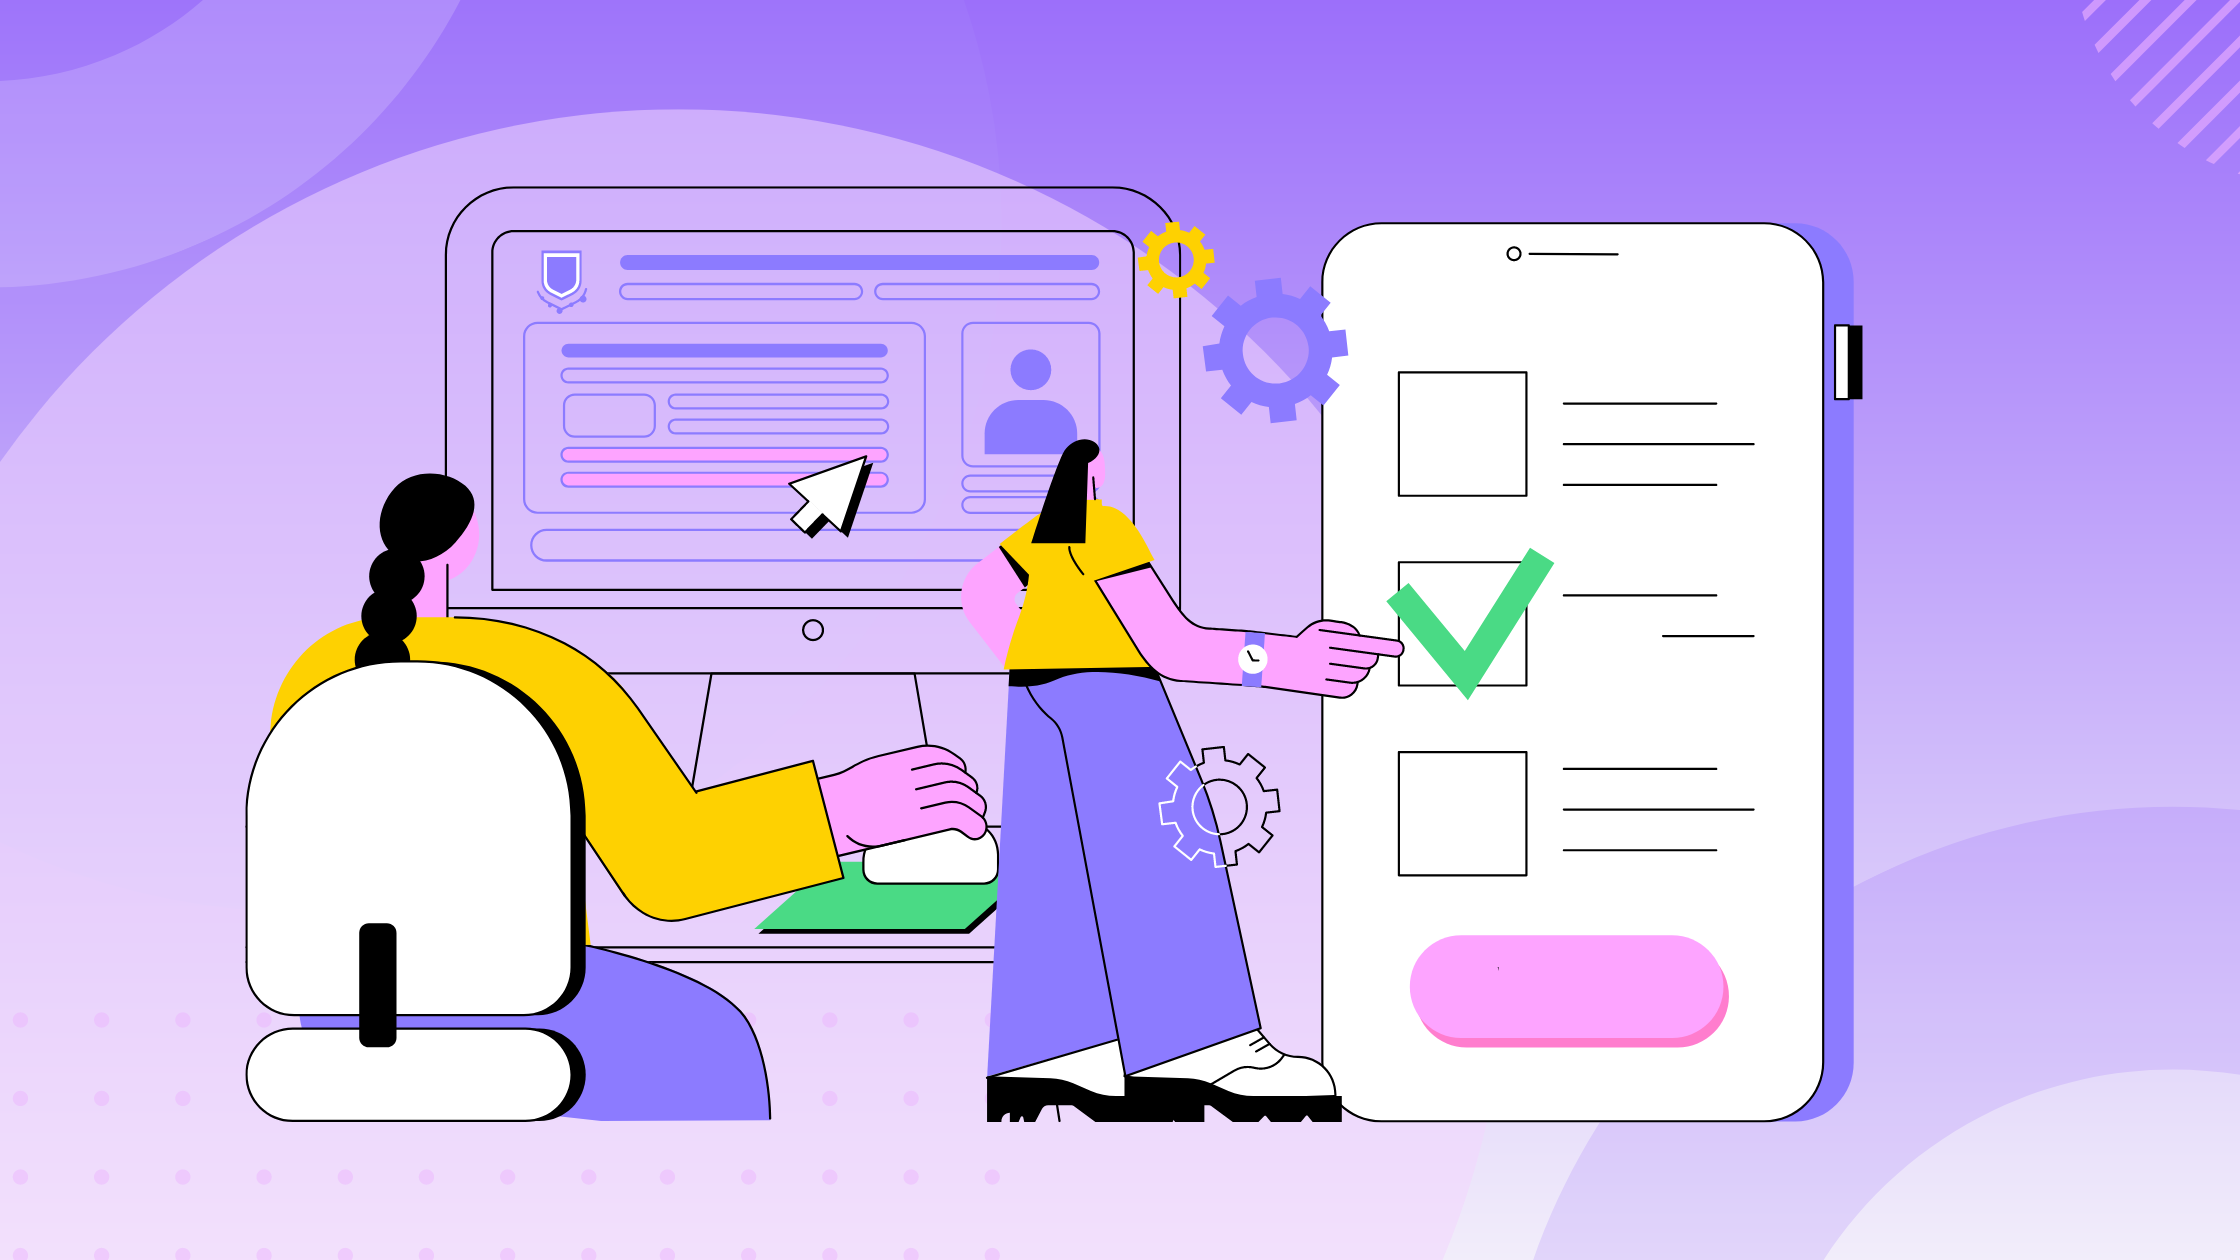 Designing a Client Onboarding Questionnaire Your Customers Actually Complete